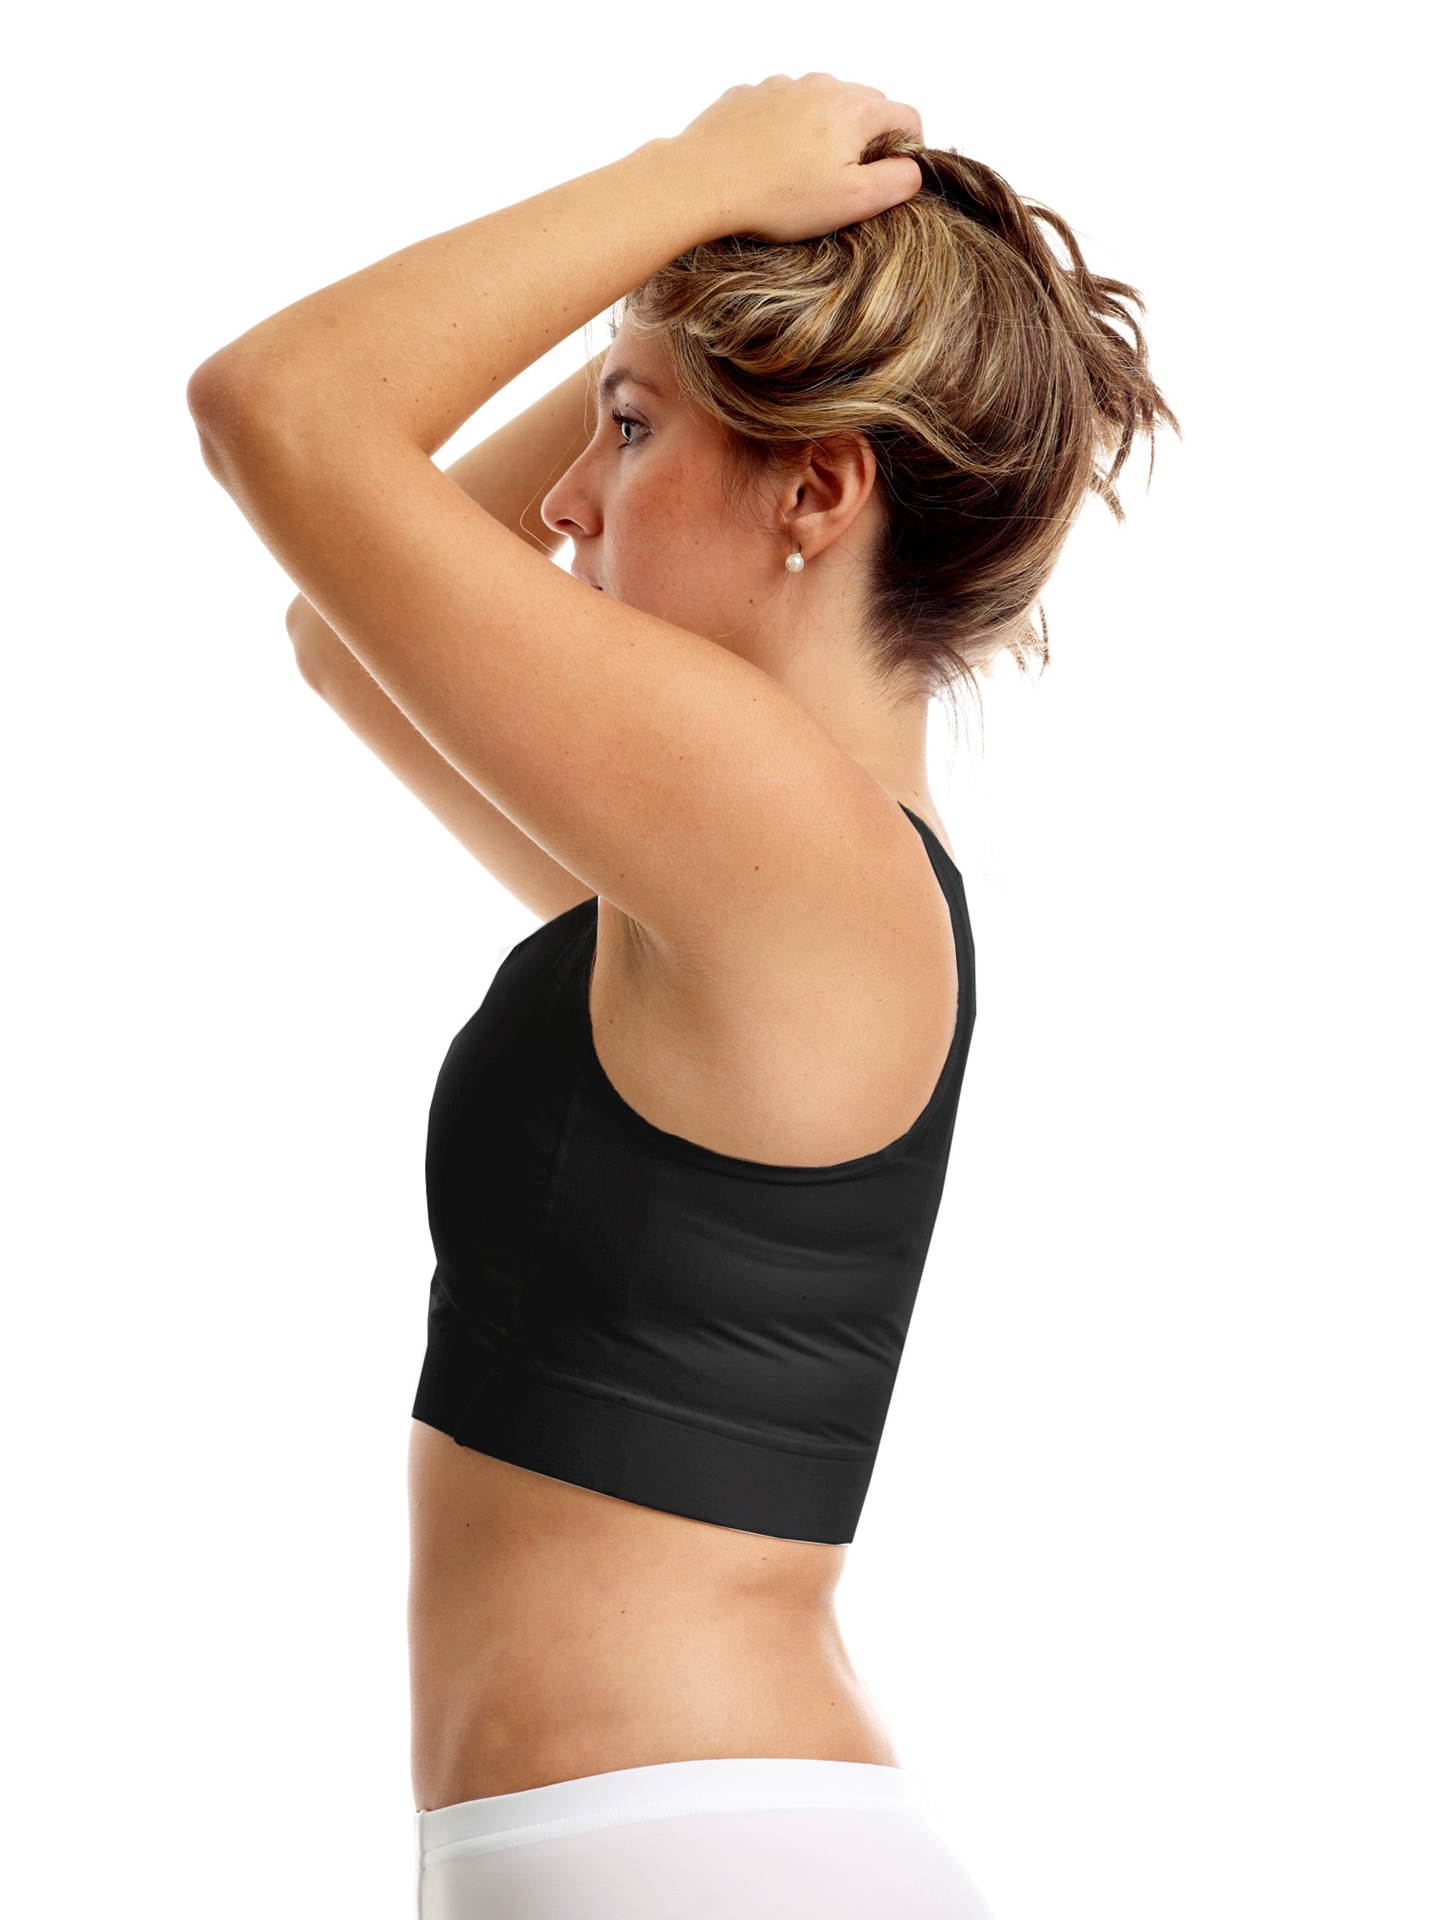 Best Sports Bra For Underarm Fat Photos, Download The BEST Free